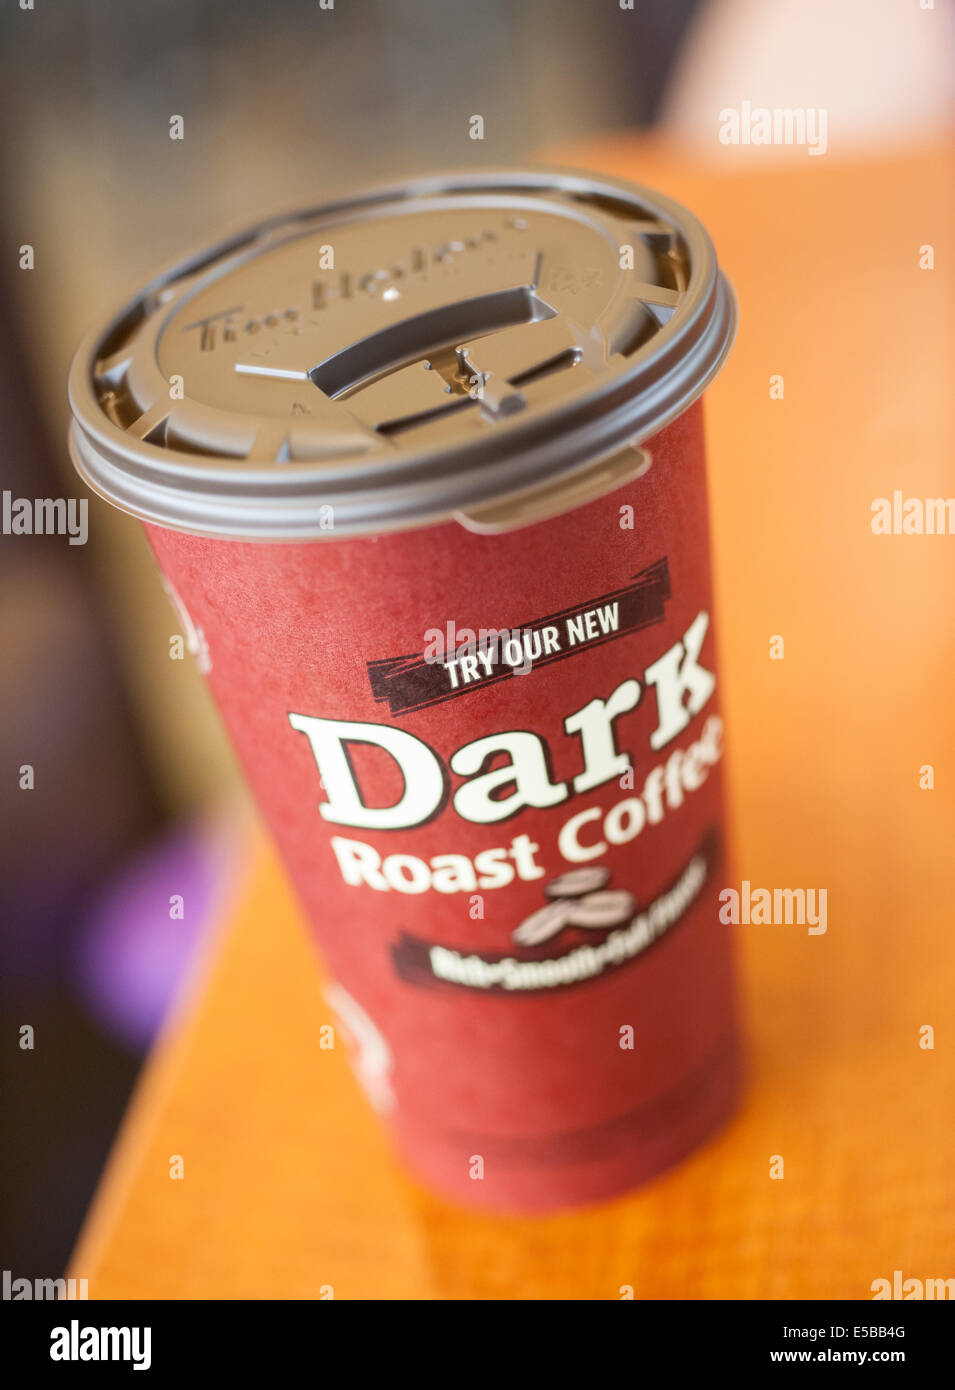 A cup of Coffee from Tim Horton's restaurant Stock Photo